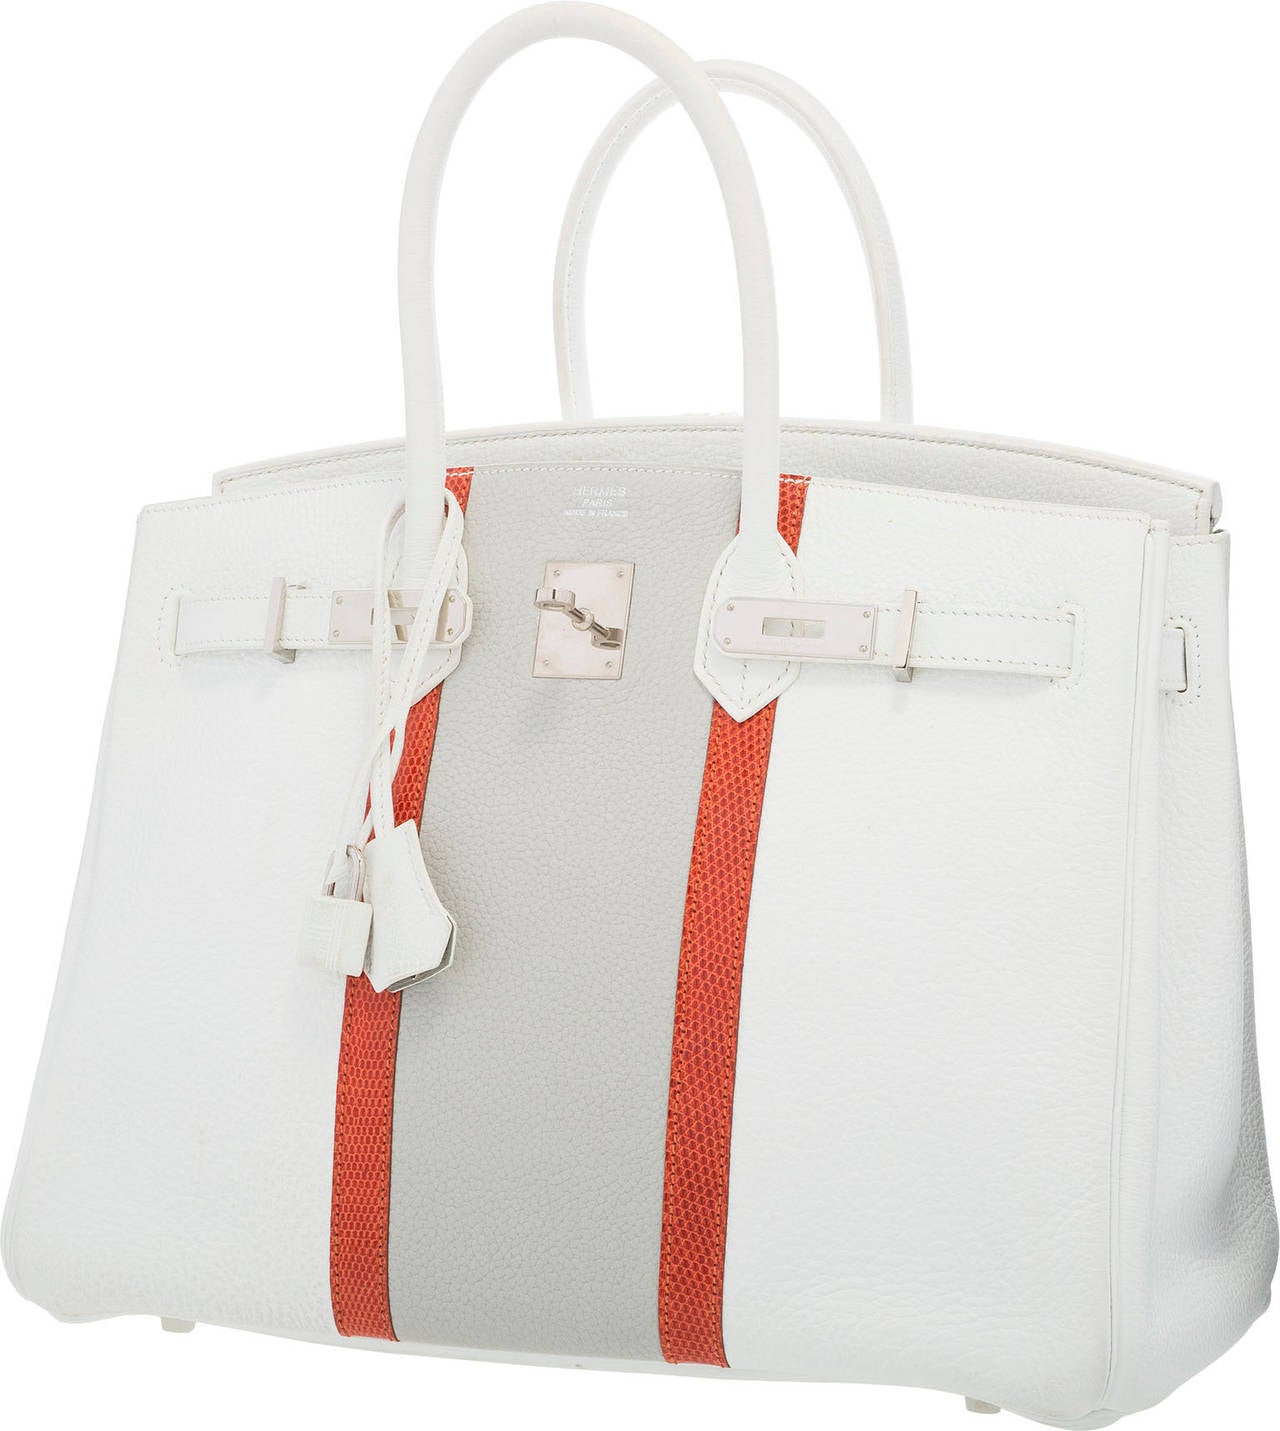 This Limited Edition Birkin is rare, unique, and gorgeous. It is done in crisp colors of White, Gris Perle, and Sanguine, making even this incredibly rare bag perfect for the Hermes collector. The exterior is done in Clemence and Togo Leathers with